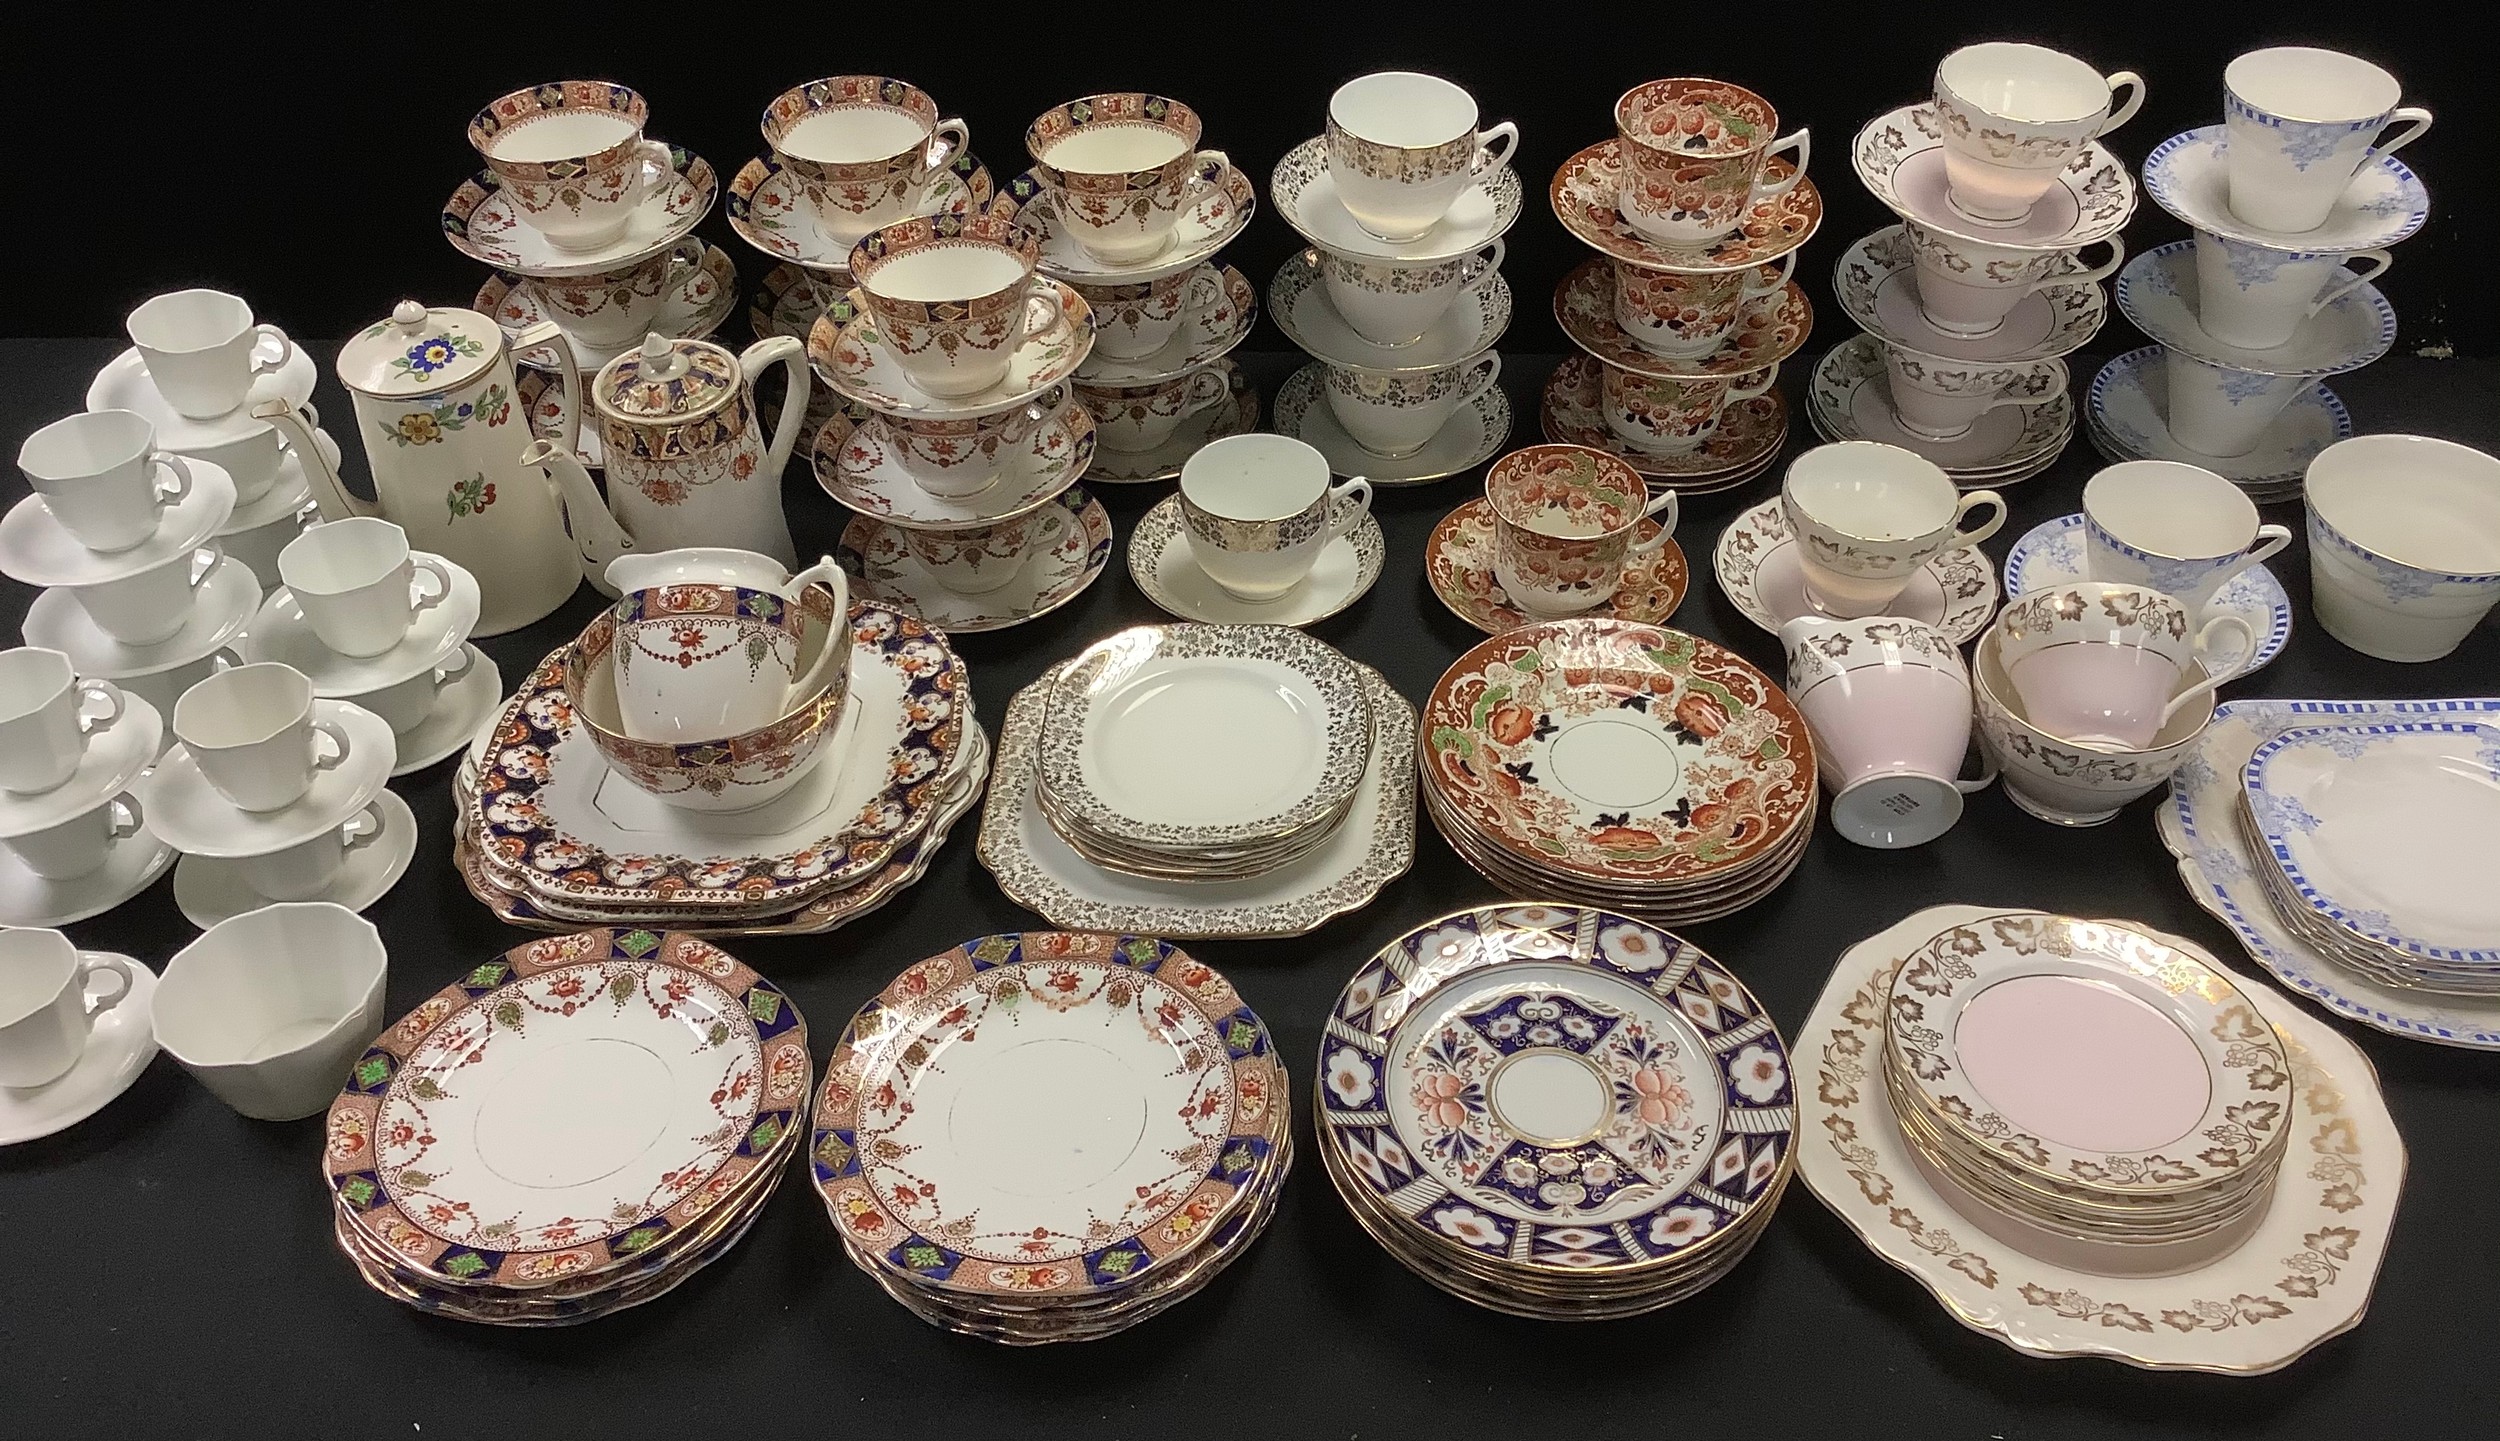 Teaware - Victoria tea service; Diamond China; Doric China; Royal Crown Derby coffee cups and